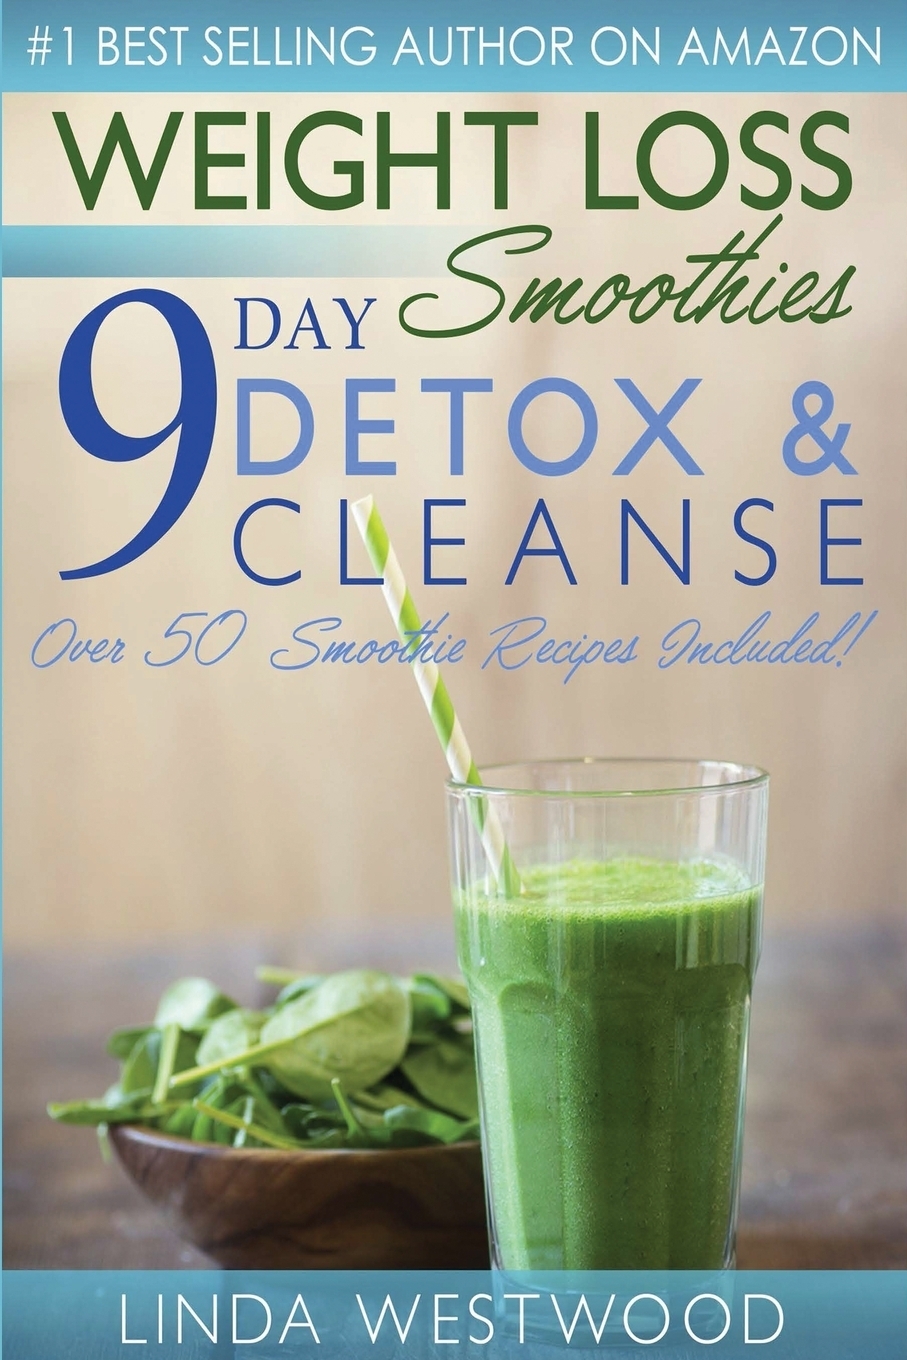 фото Weight Loss Smoothies (4th Edition). 9-Day Detox & Cleanse - Over 50 Recipes Included!